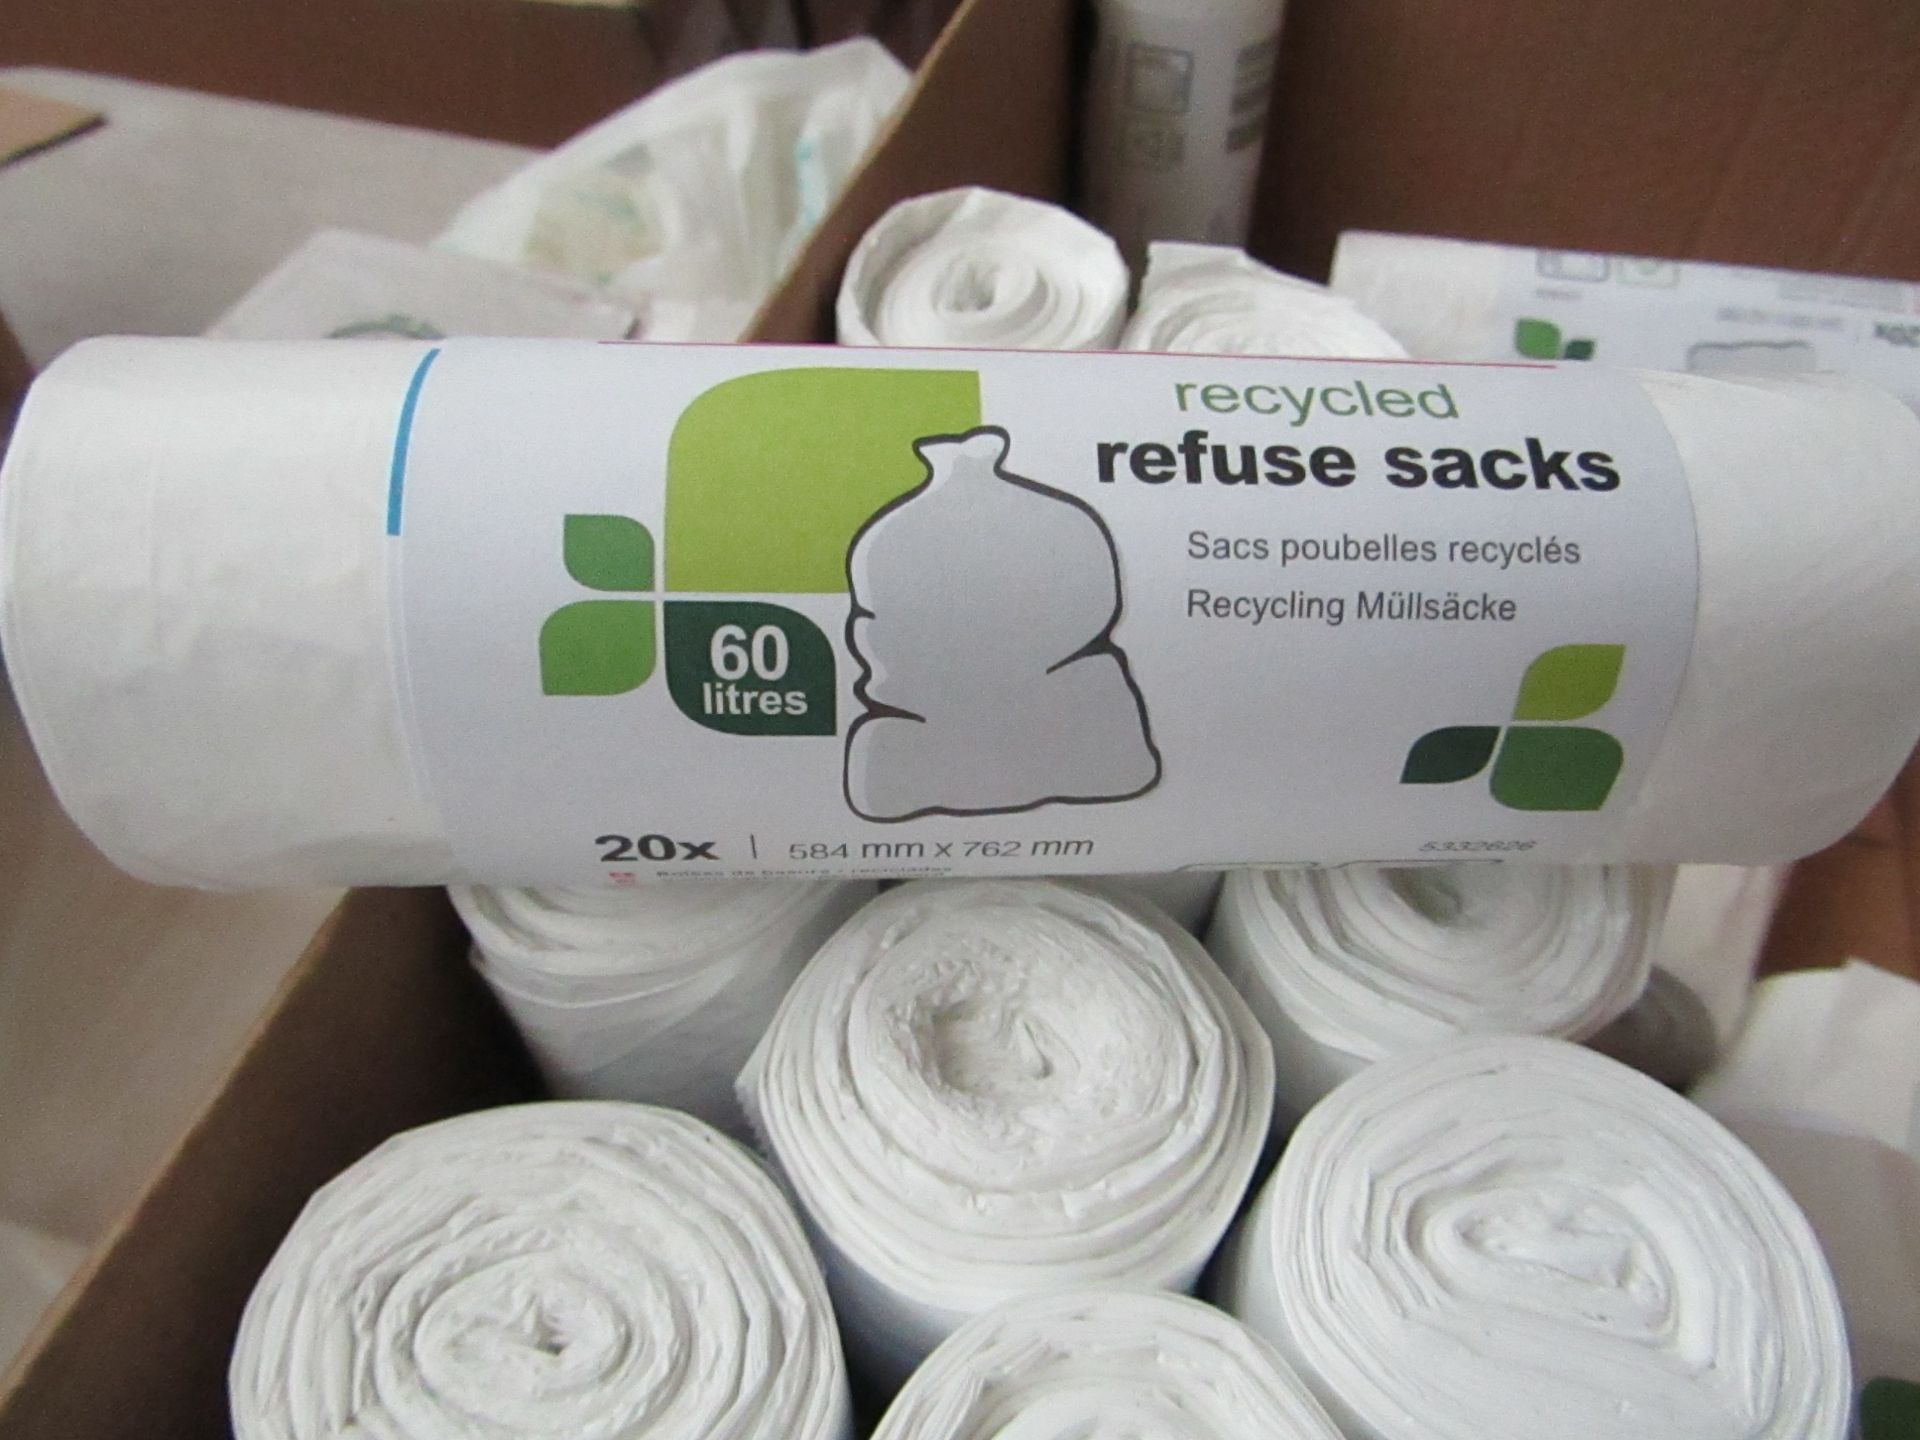 5 x 20 refuse sacks,60litre ,new in packaging